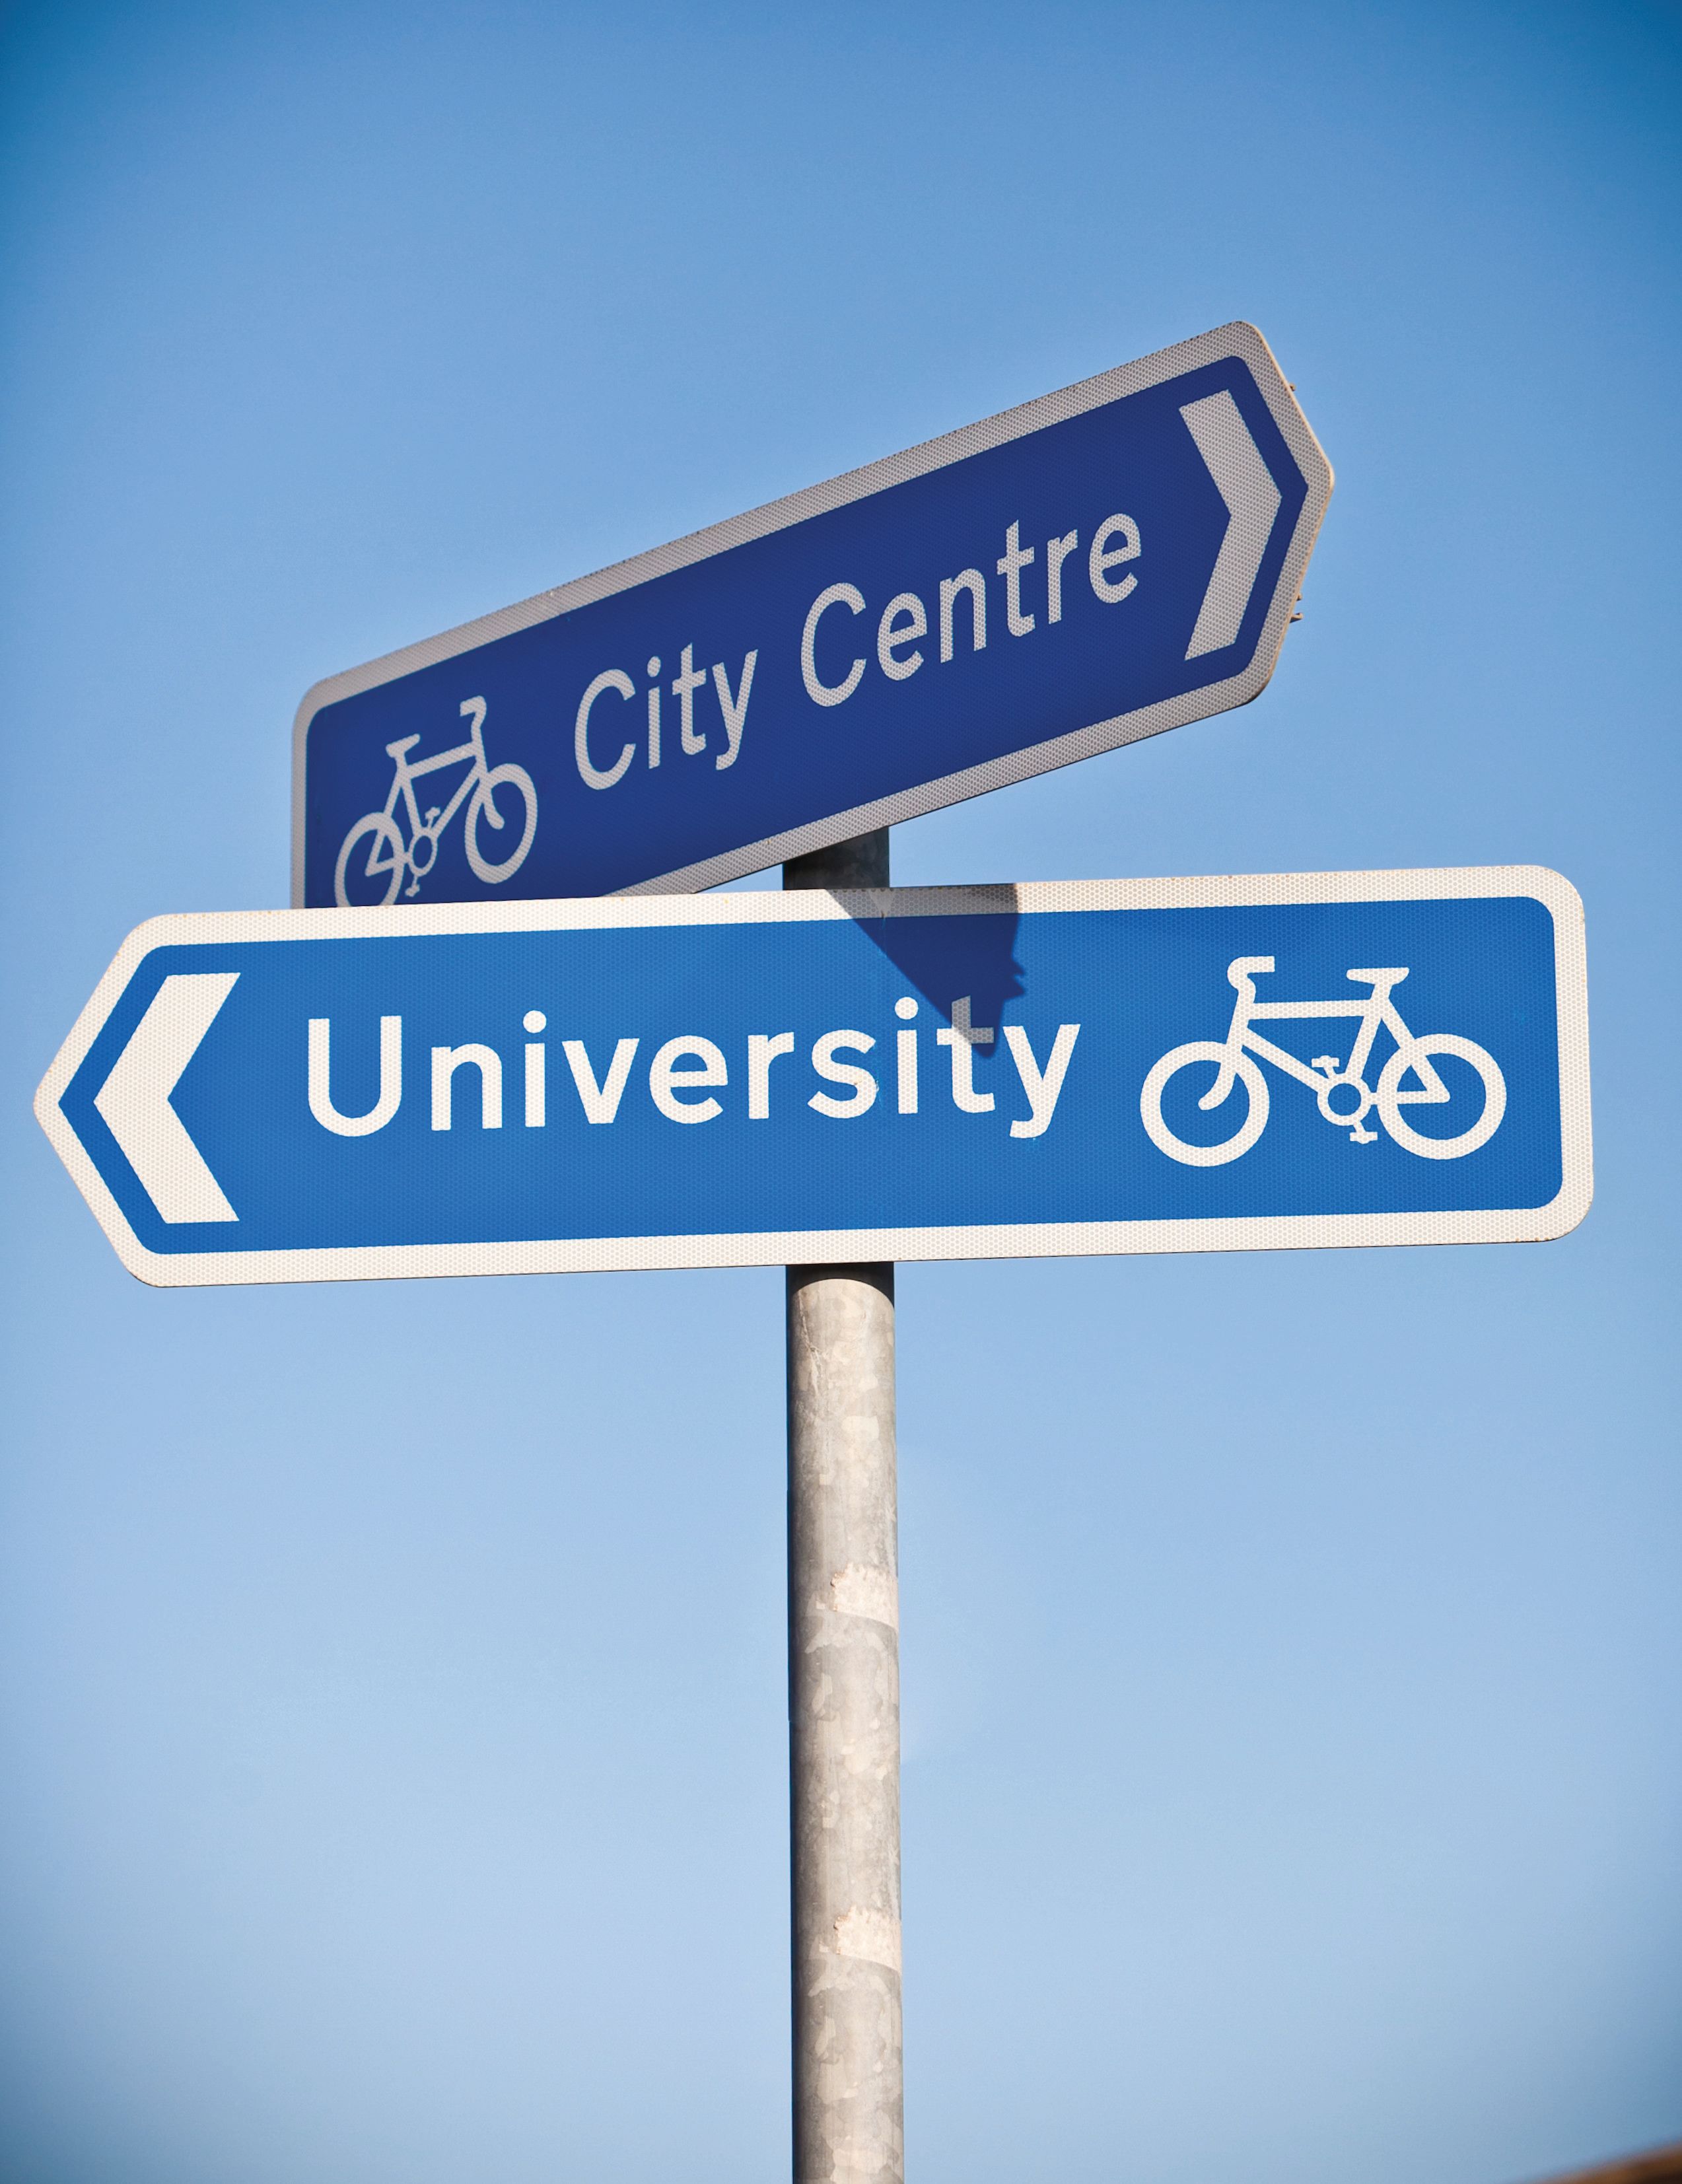 Two blue direction signs, pointing towards the City Centre and University